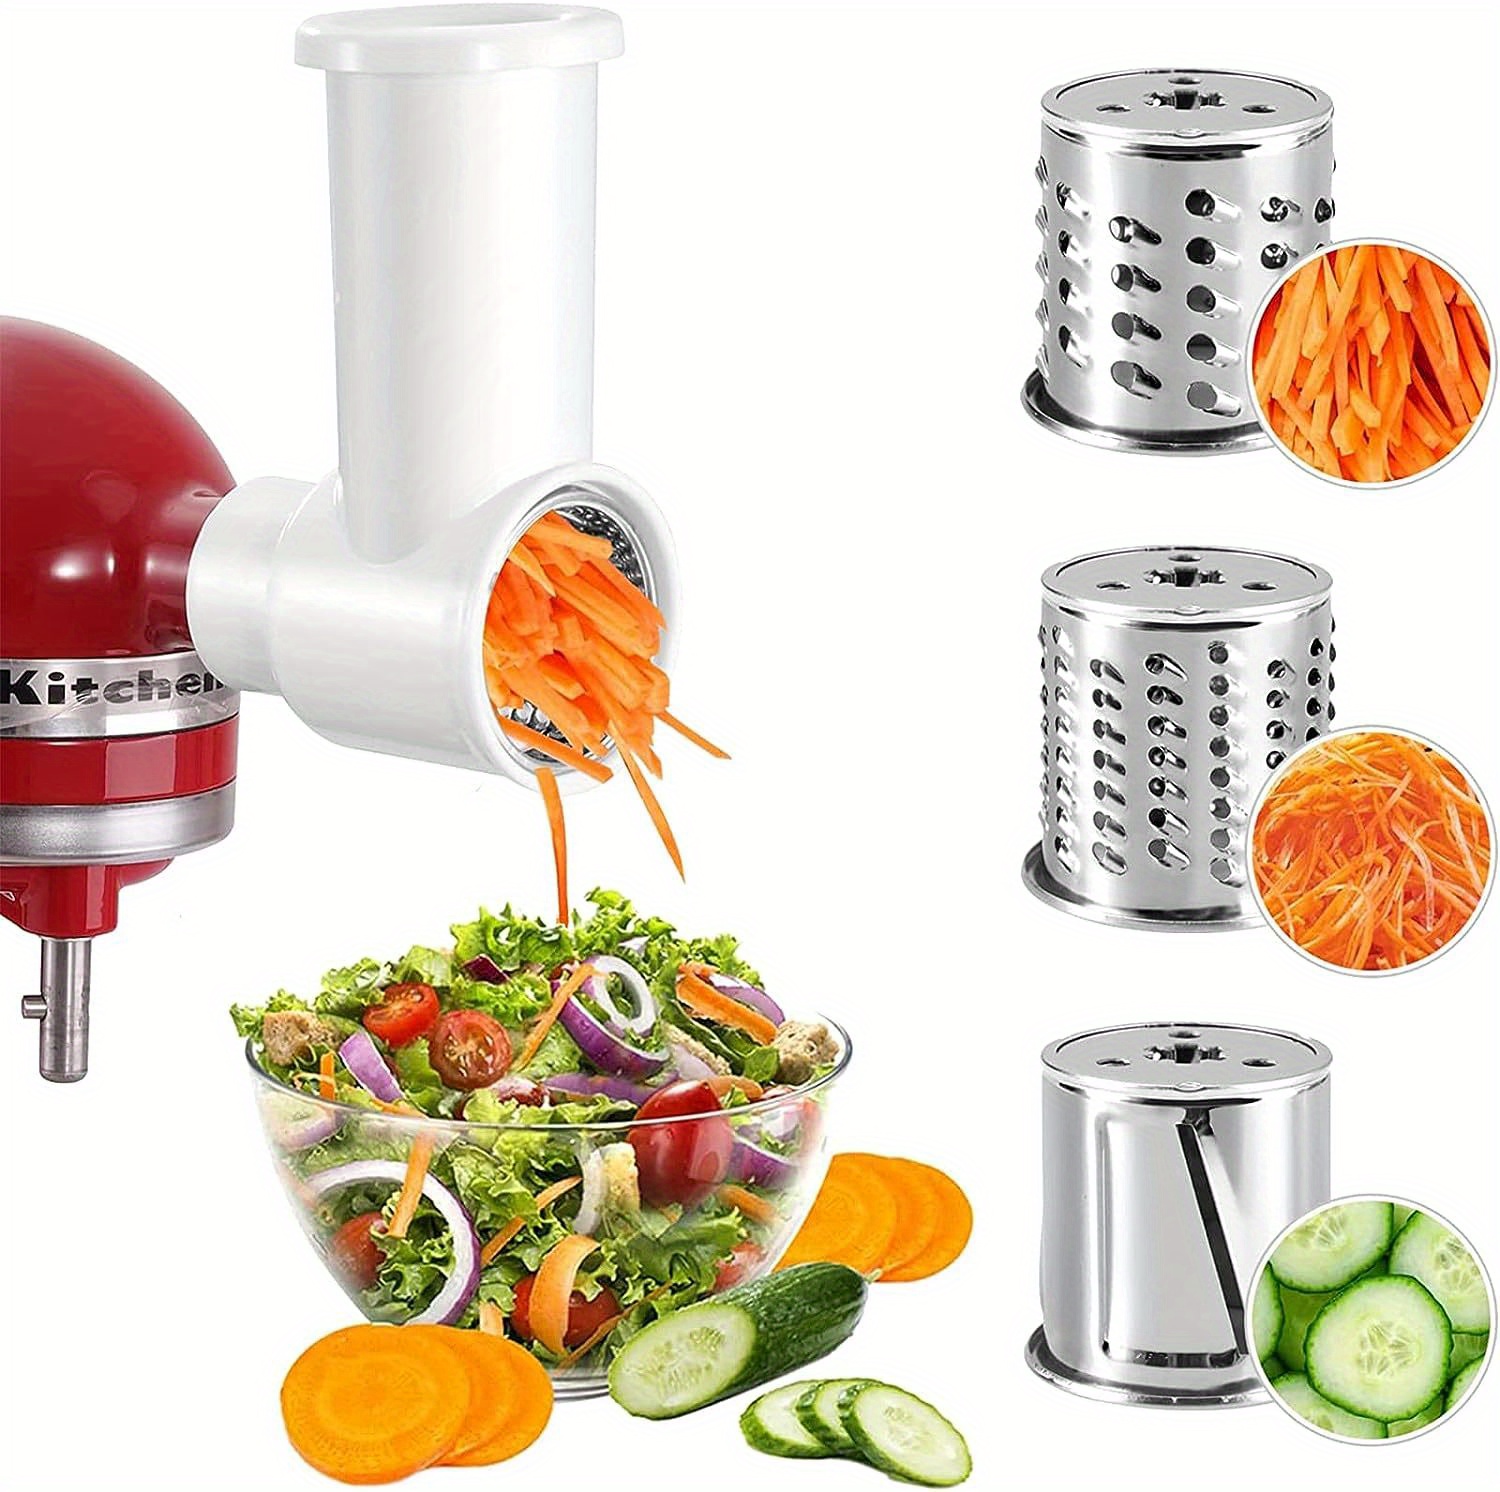  Slicer/Shredder Attachment fits KitchenAid Stand Mixer,Vegetable  Salad Maker Accessories,Fresh Prep Attachment,Cheese Grater Attachments for Kitchen  Aid Mixers Accessories Included 3 Blades: Home & Kitchen